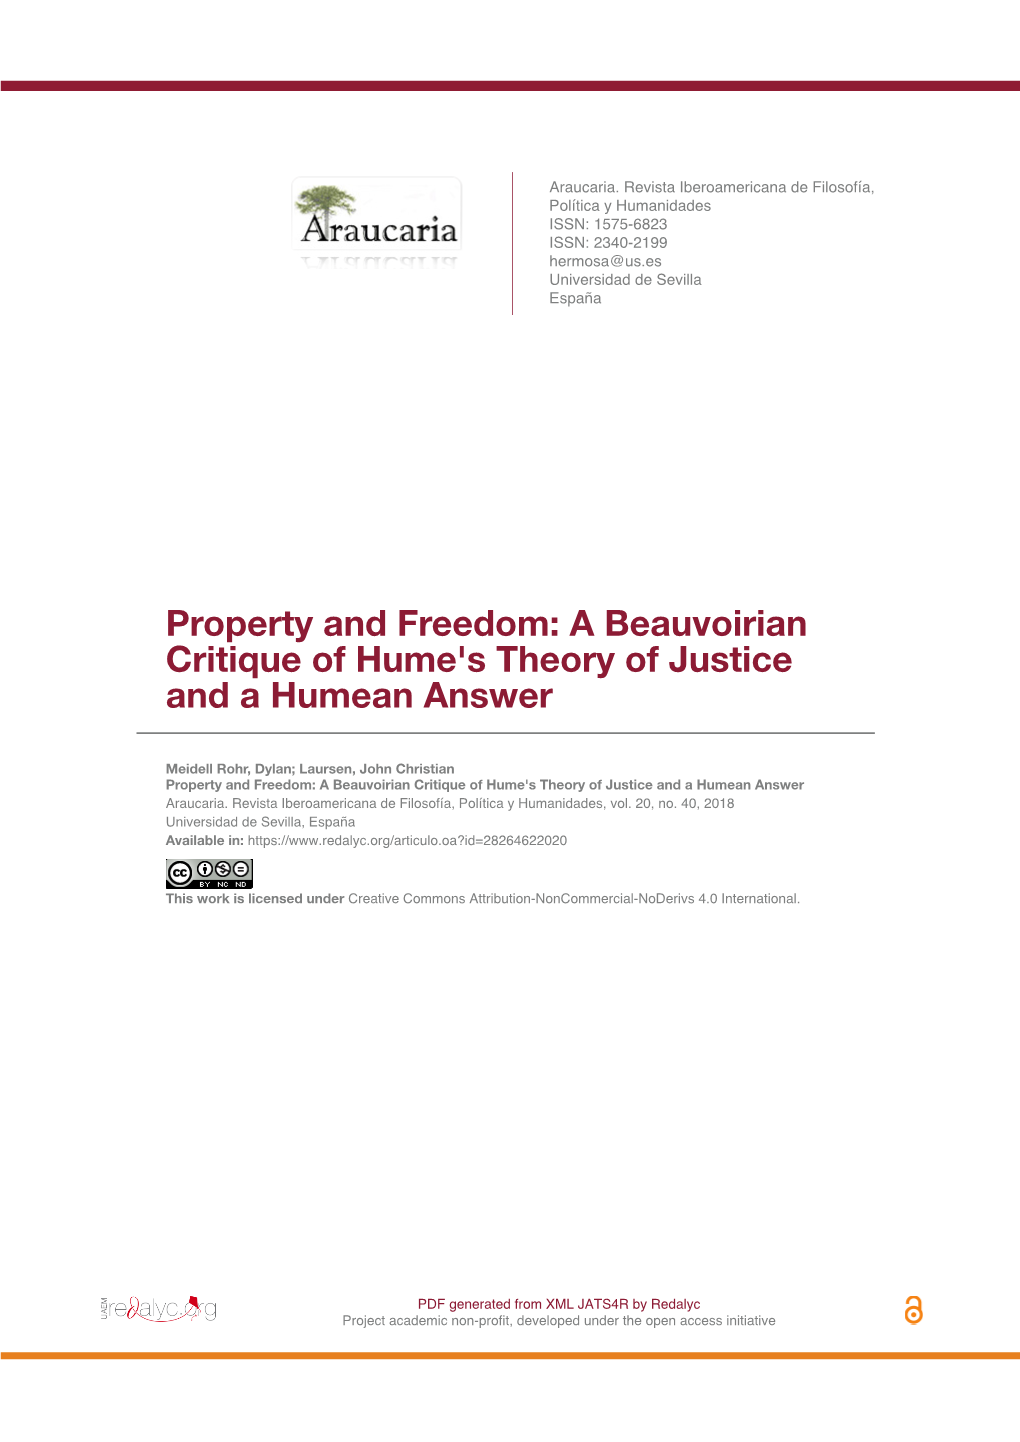 Property and Freedom: a Beauvoirian Critique of Hume's Theory of Justice and a Humean Answer